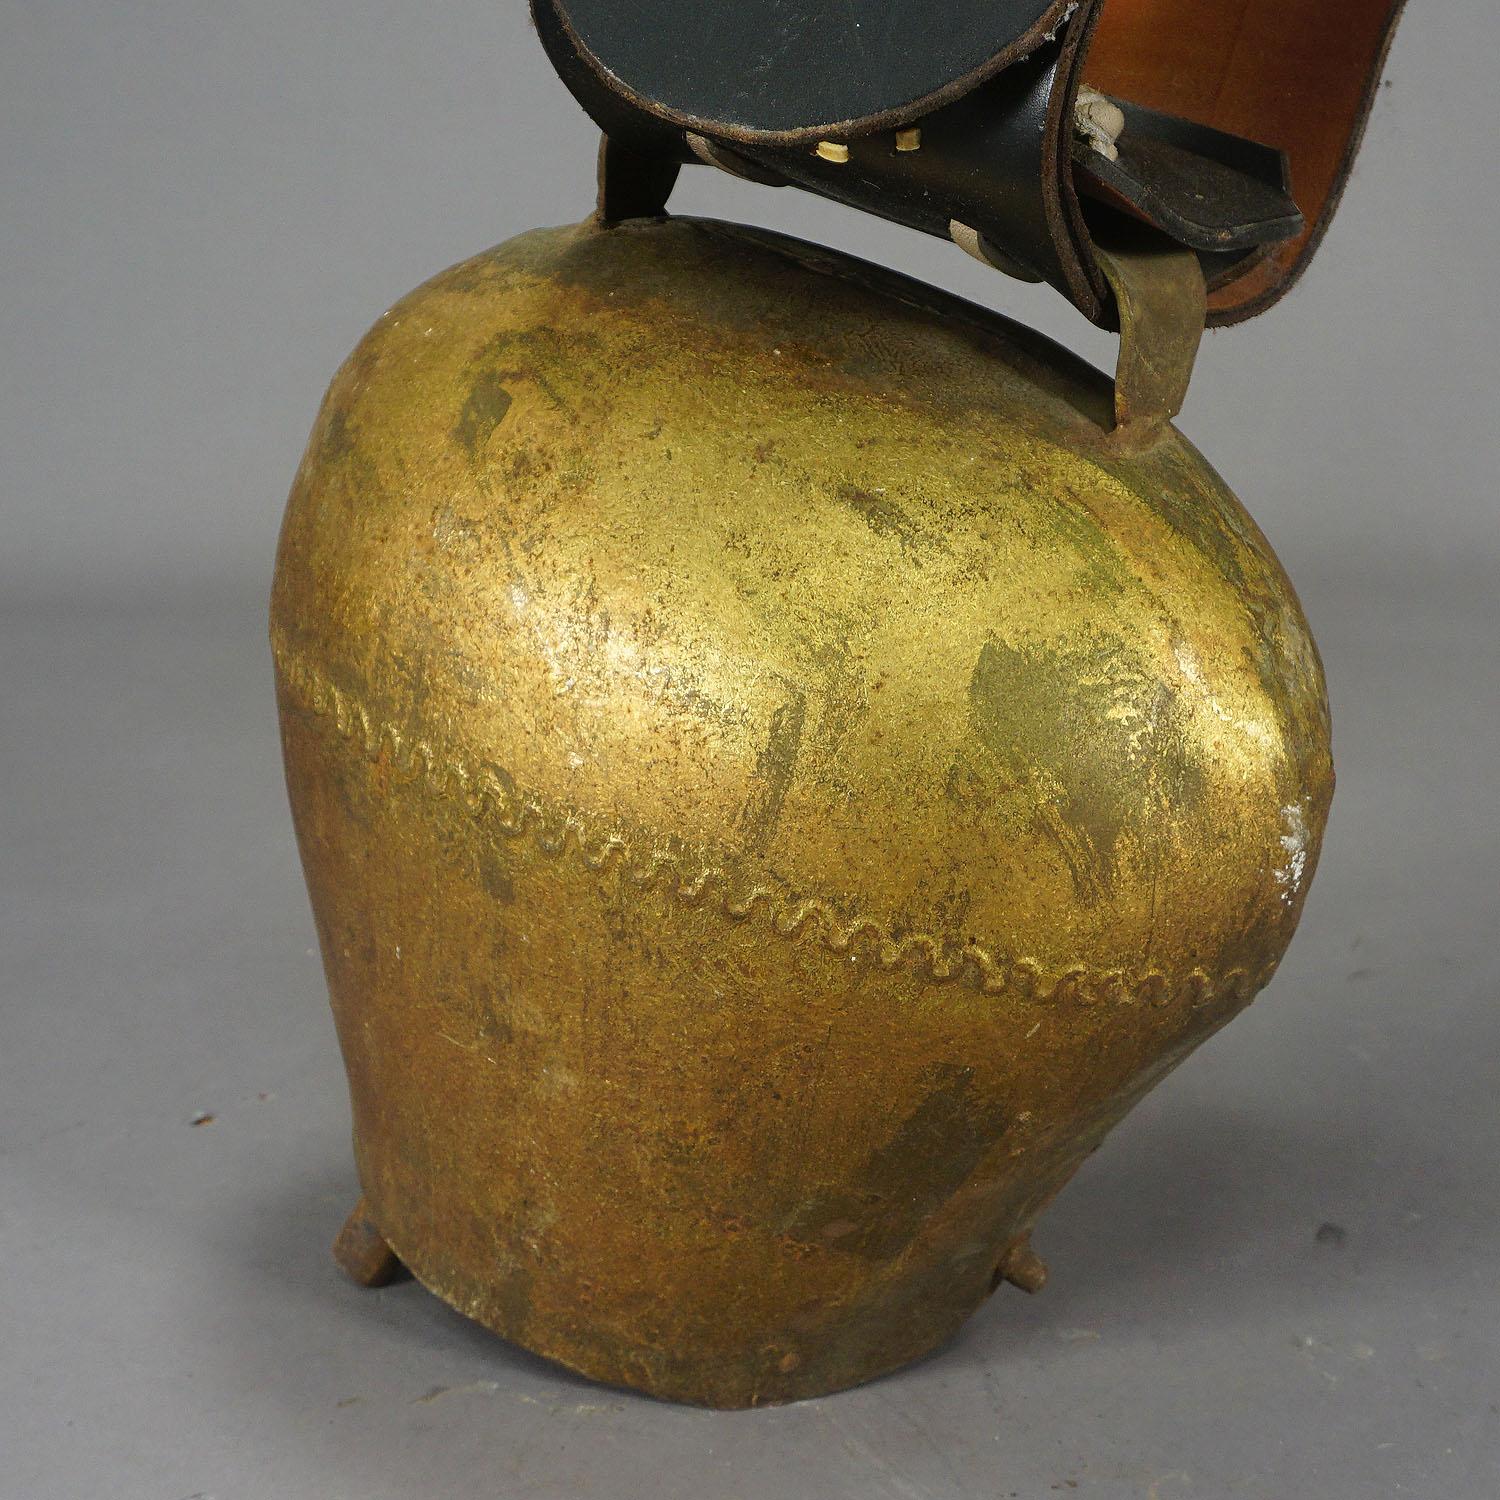 Black Forest Vintage Swiss Handforged Cow Bell with Leather Strap, ca. 1920